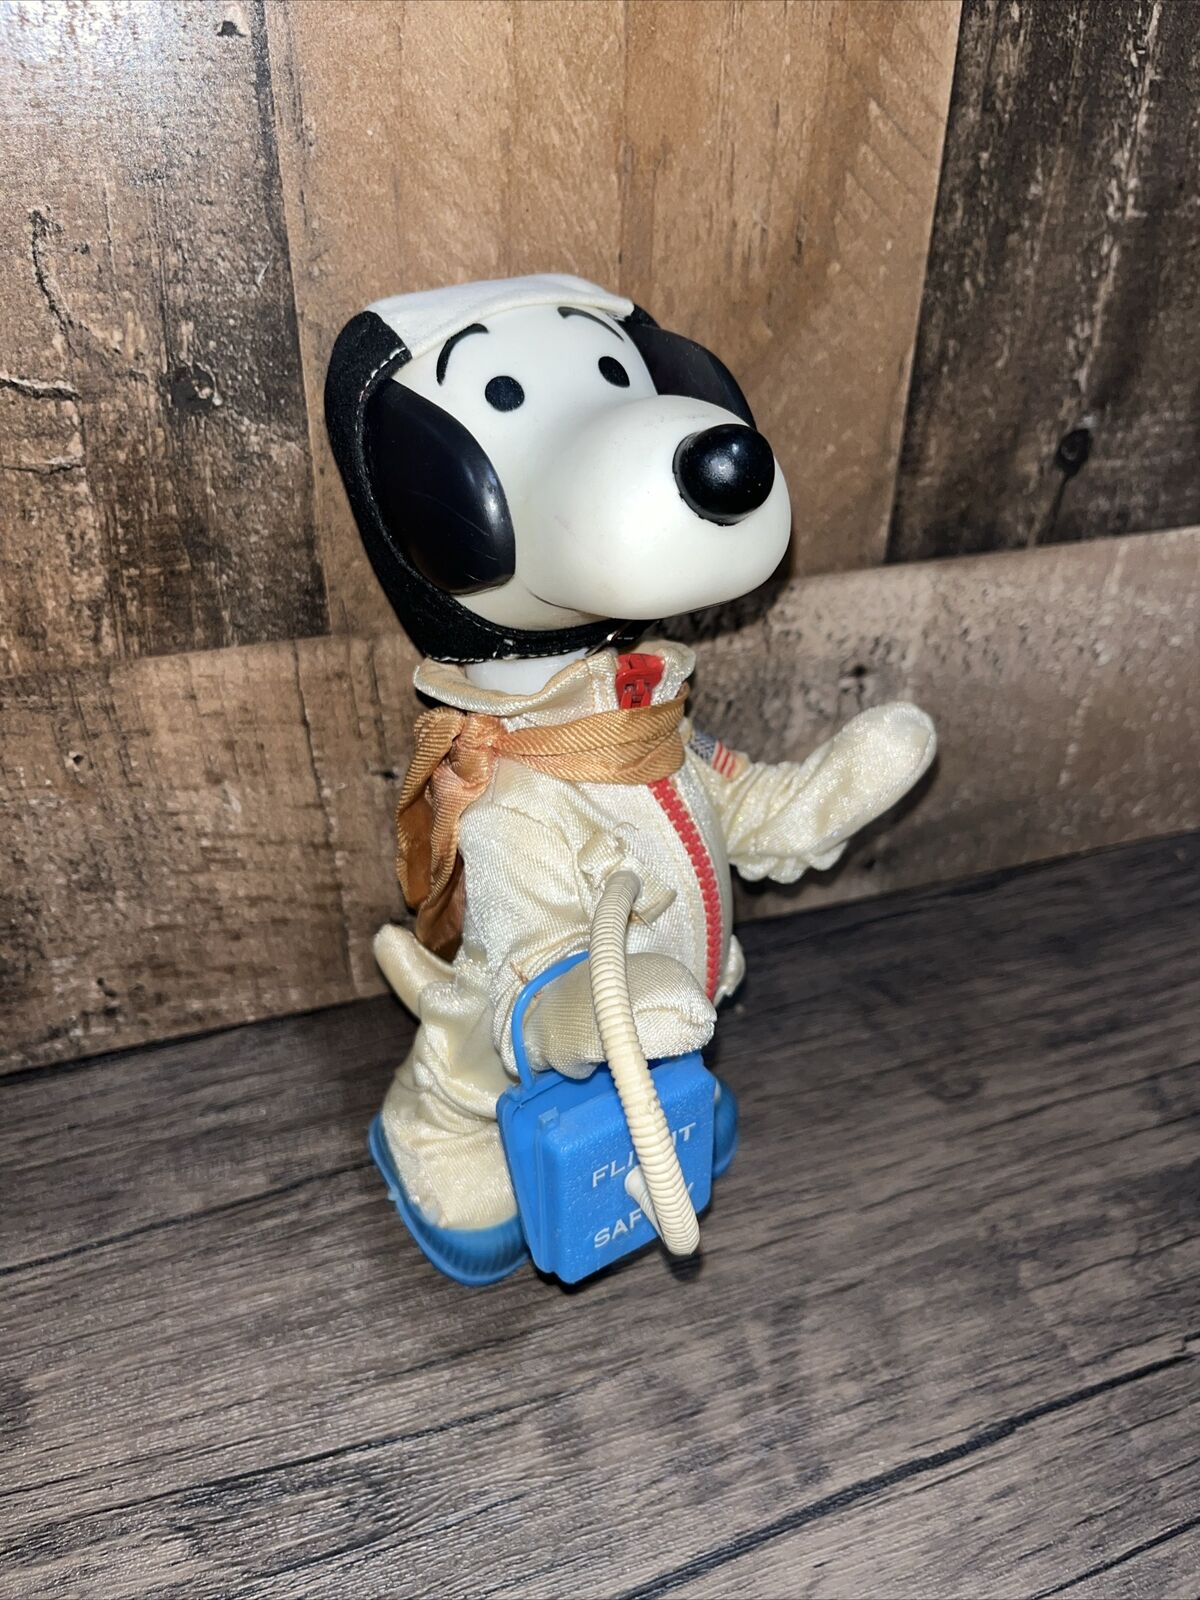 Vintage Peanuts 1969 SNOOPY ASTRONAUT SPACE Collectible Figure 7 1/2 “